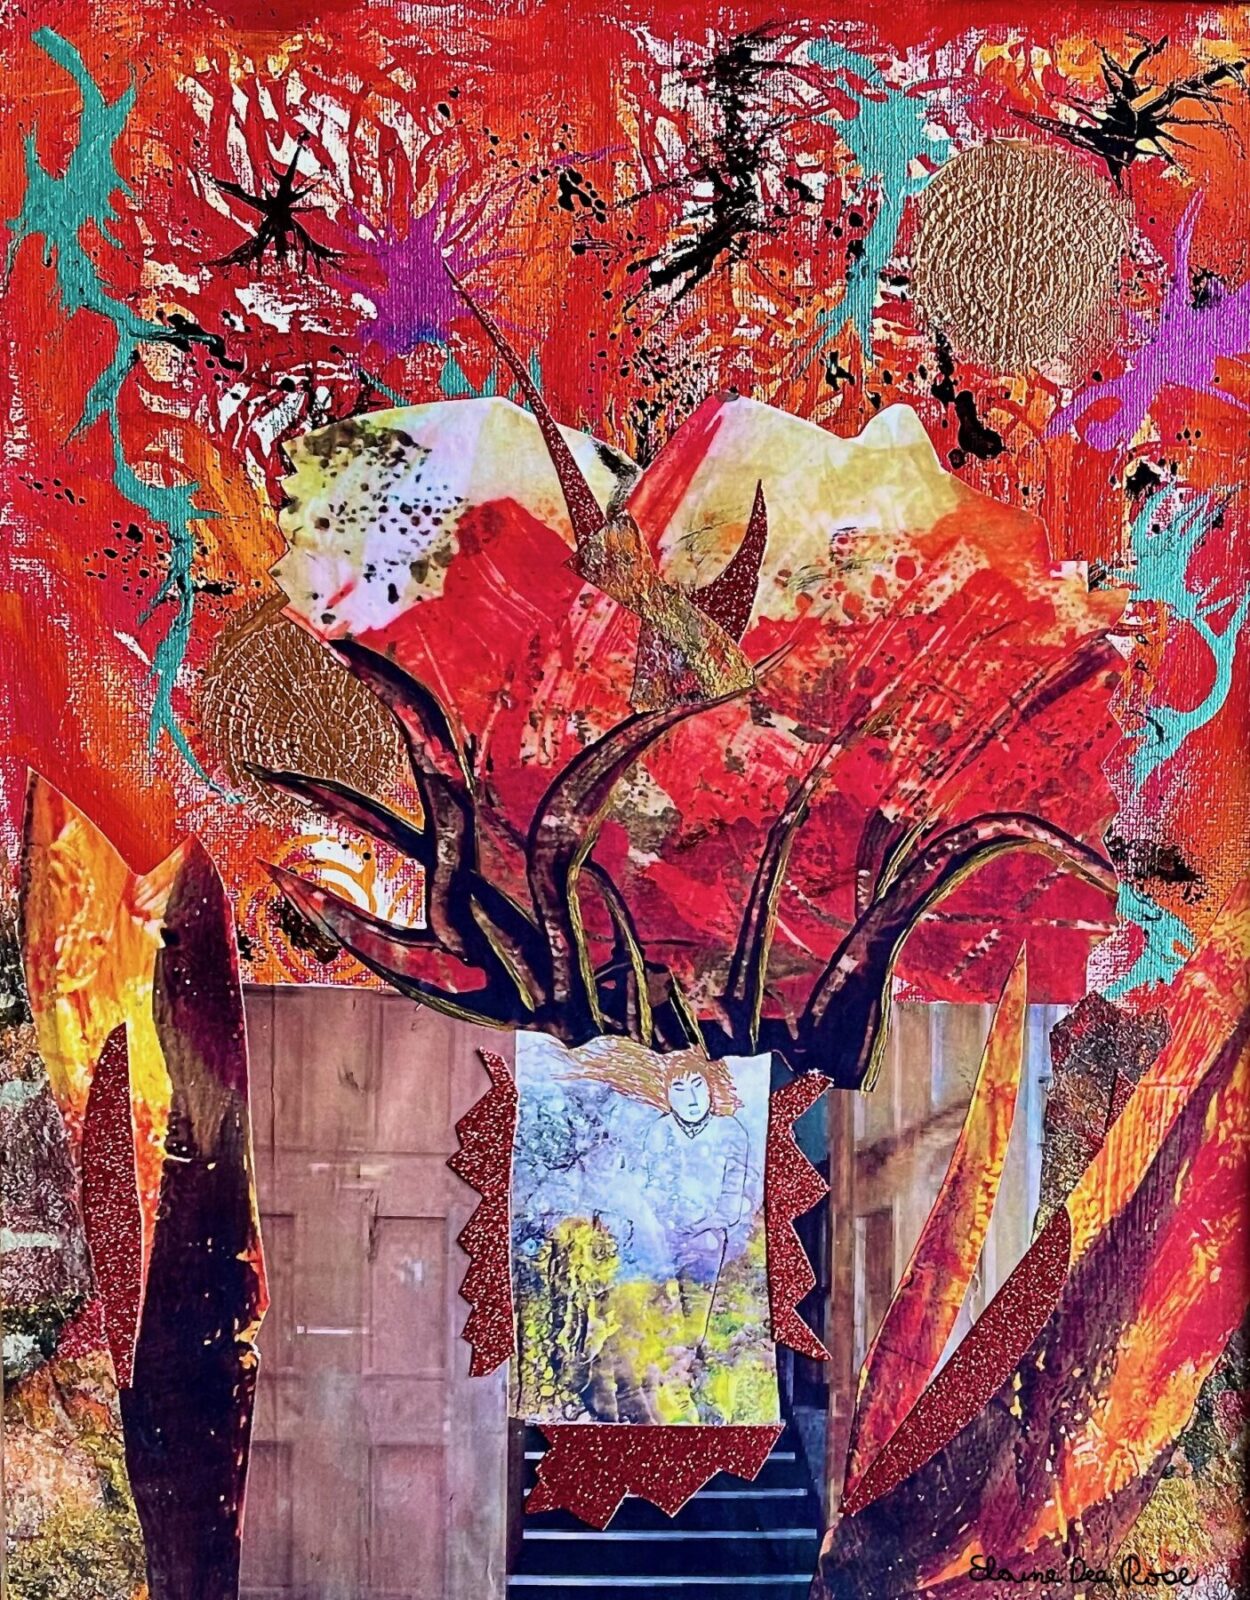 I'm an Abstract and Mixed Media Artist.  I mostly work with acrylics, and enjoy working with mixed media when creating my collages, using handmade paper, fabrics, and found objects.  Also, I enjoy creating monoprints, water marble, and encaustic works as well.